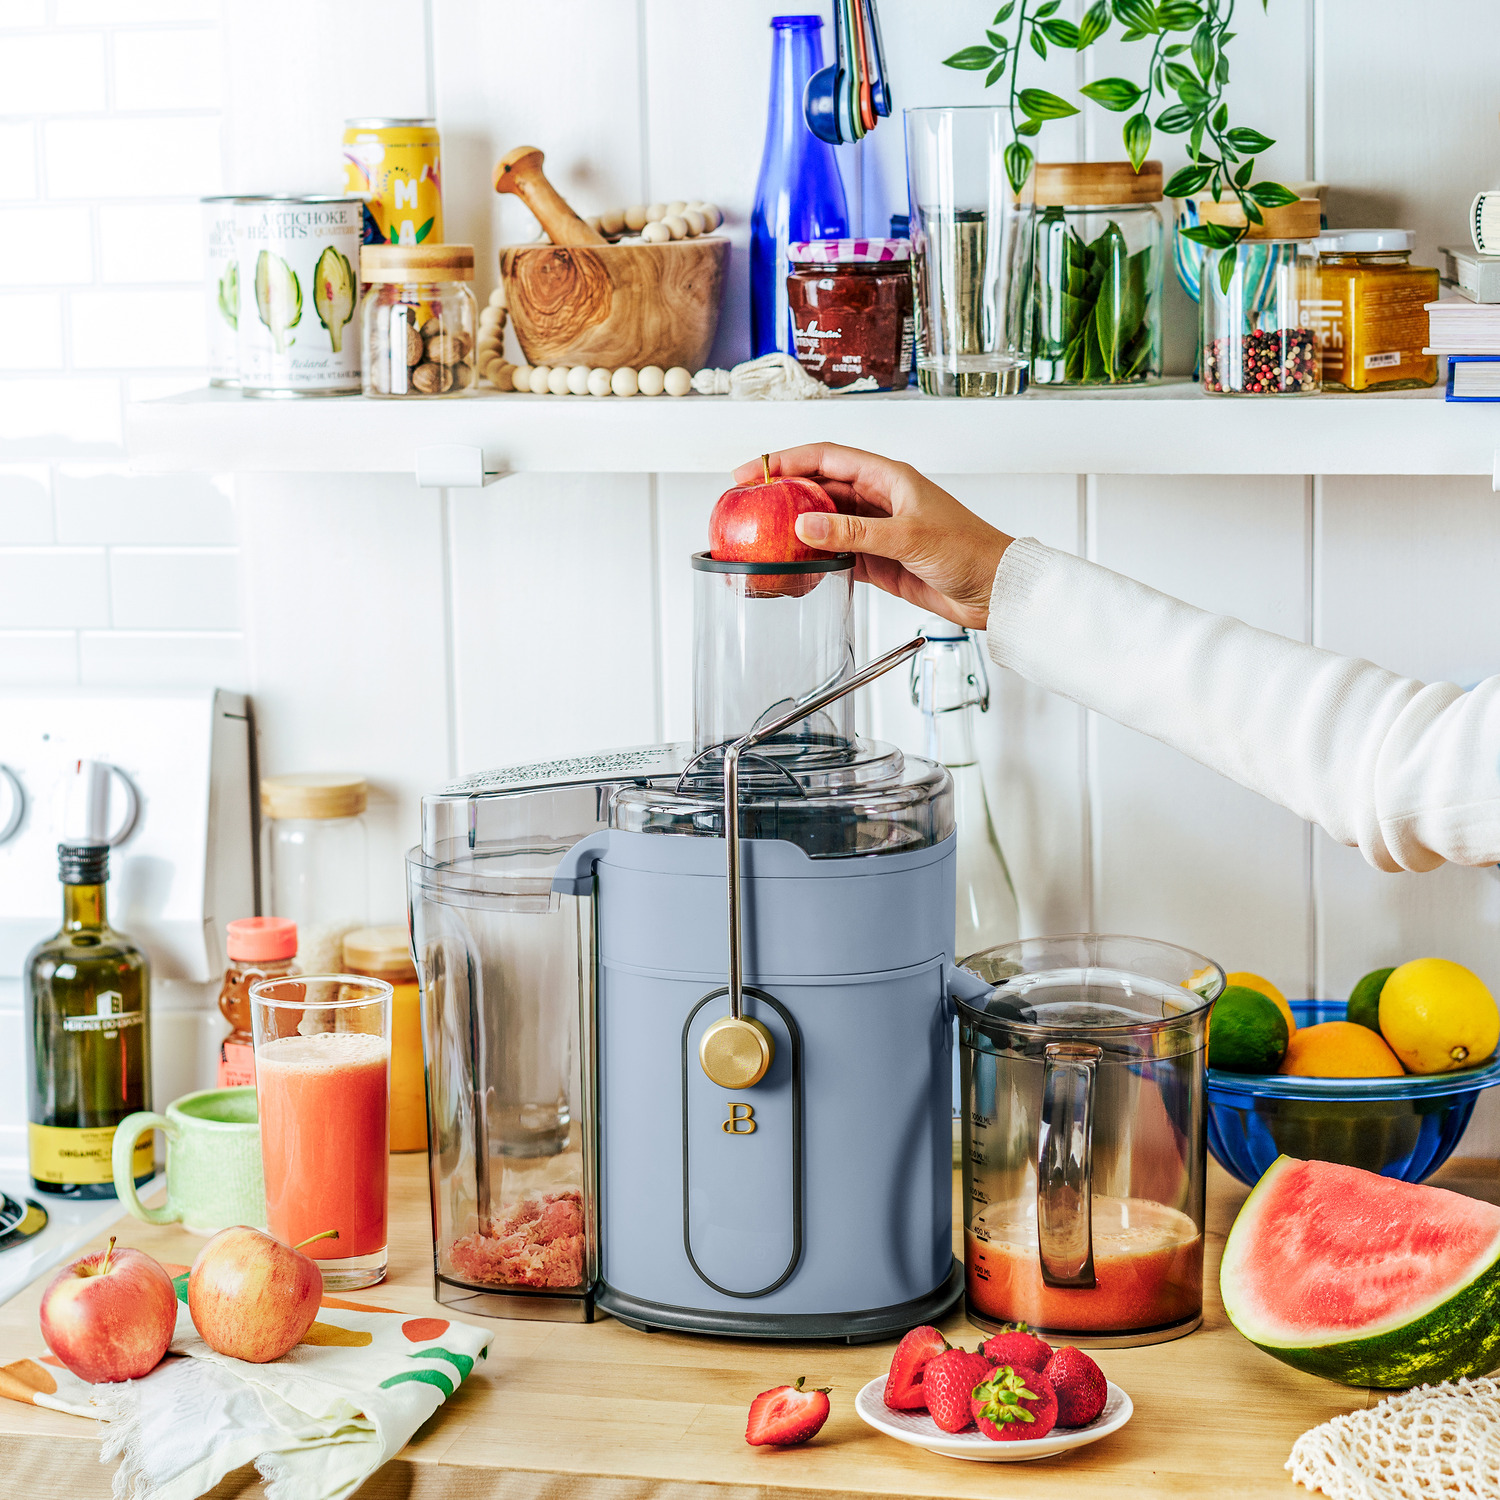 Beautiful 5-Speed 1000W Electric Juice Extractor with Touch Activated Display, Cornflower Blue by Drew Barrymore - image 3 of 11